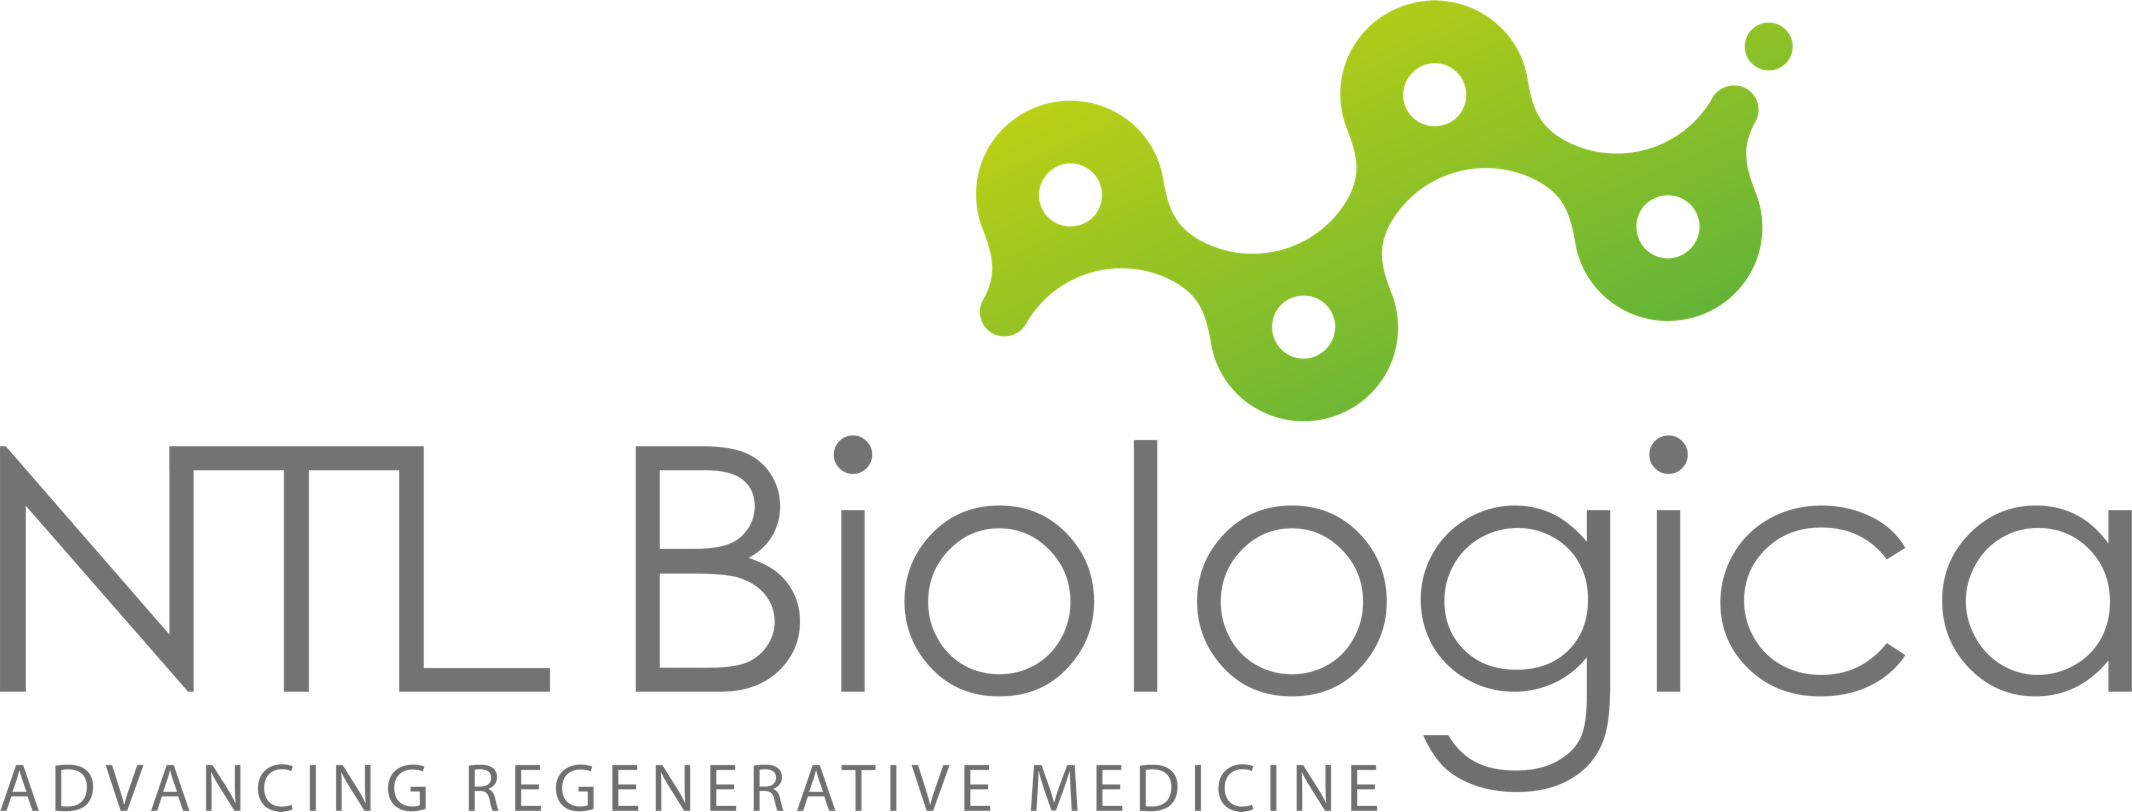 NTL Biologica Cellular Therapy Stem Cell